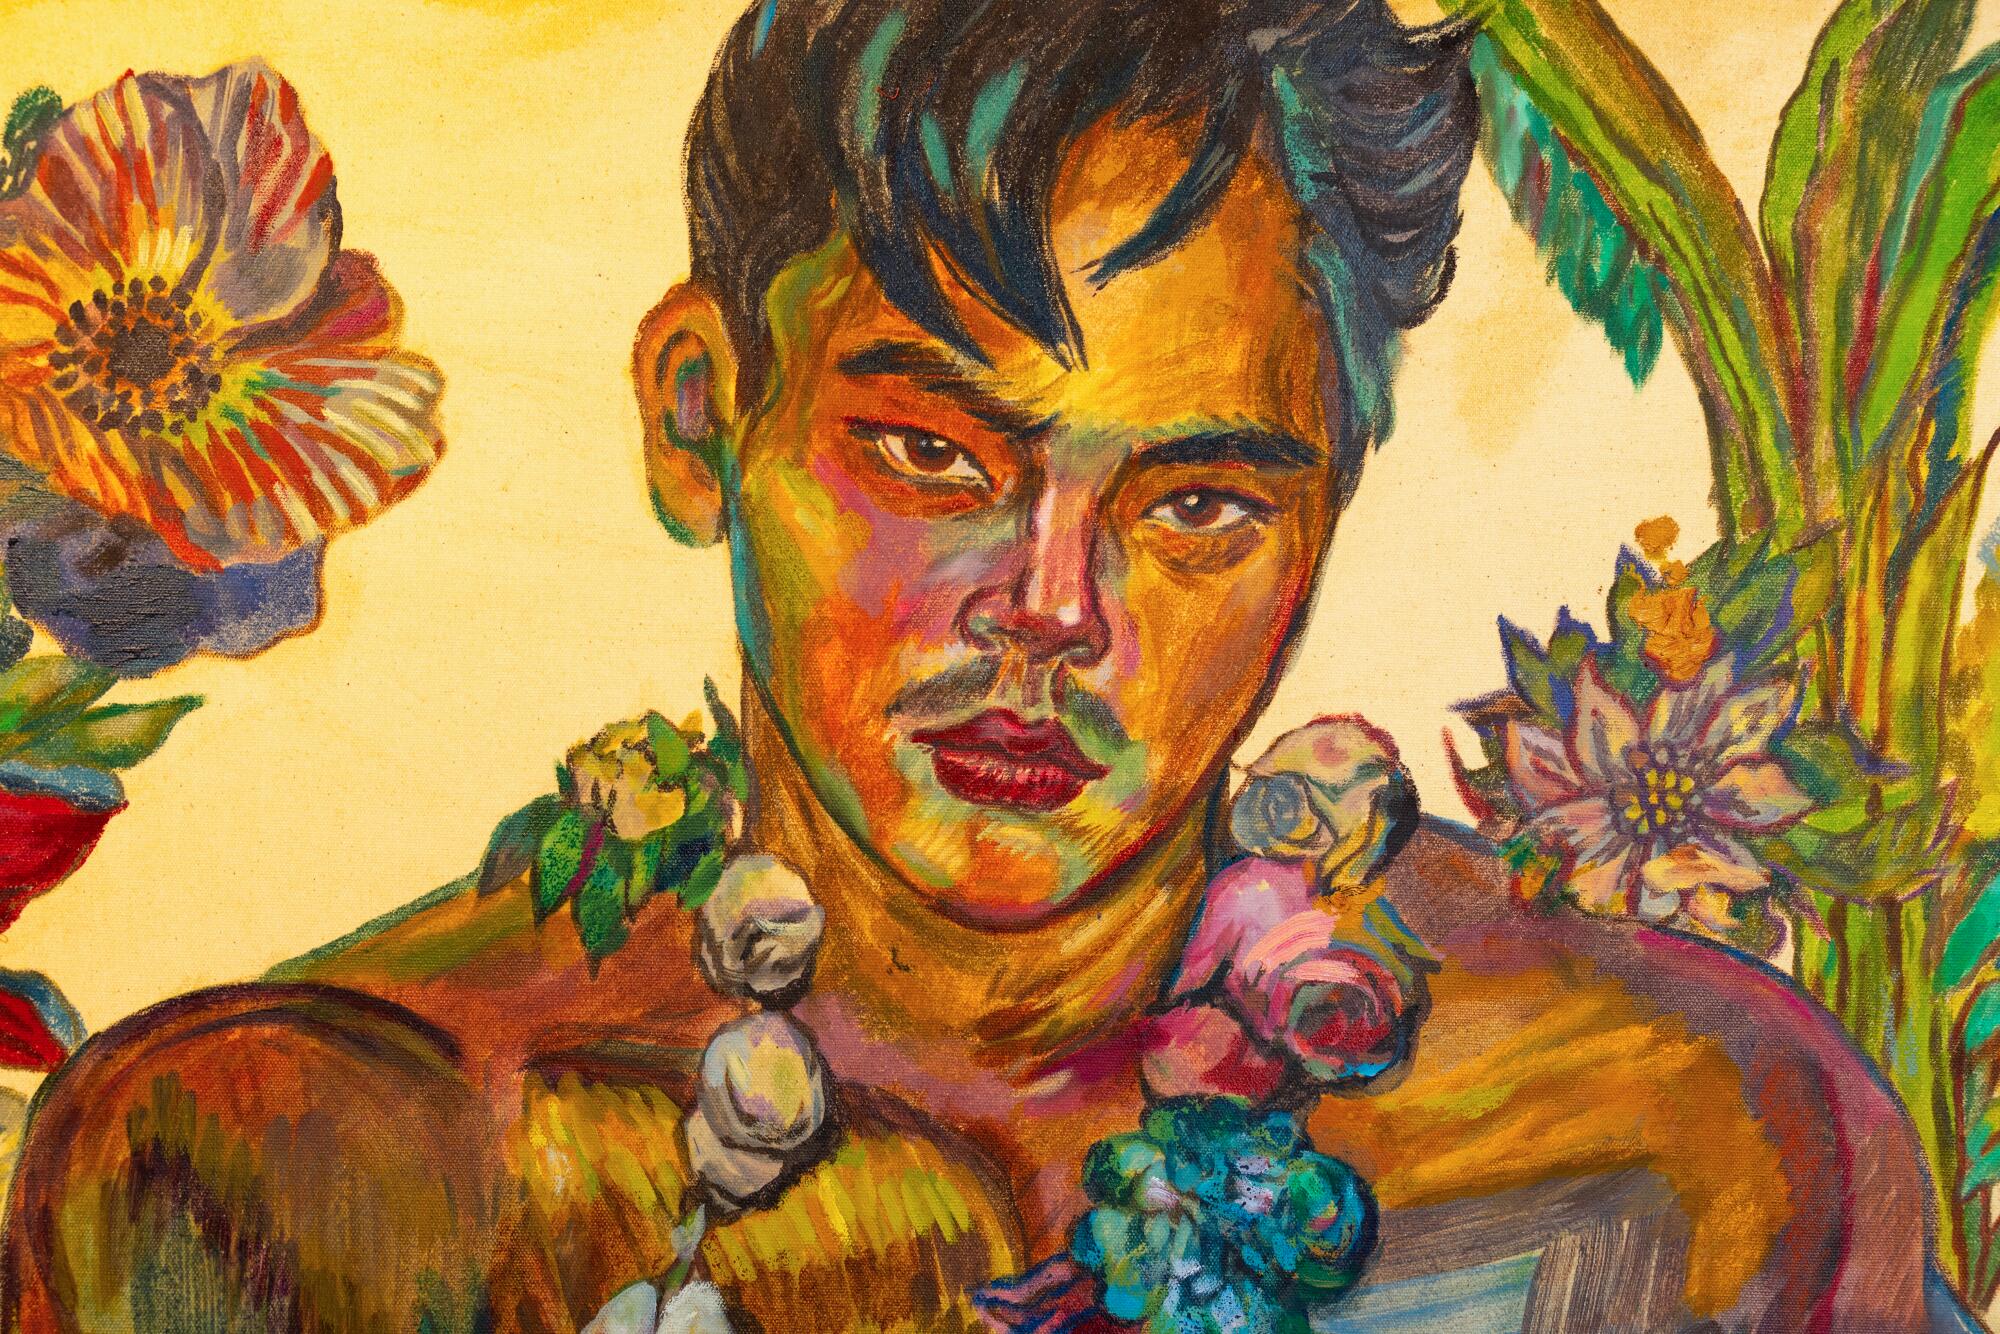 A detail of "Boy From Virgil Village," oil painting